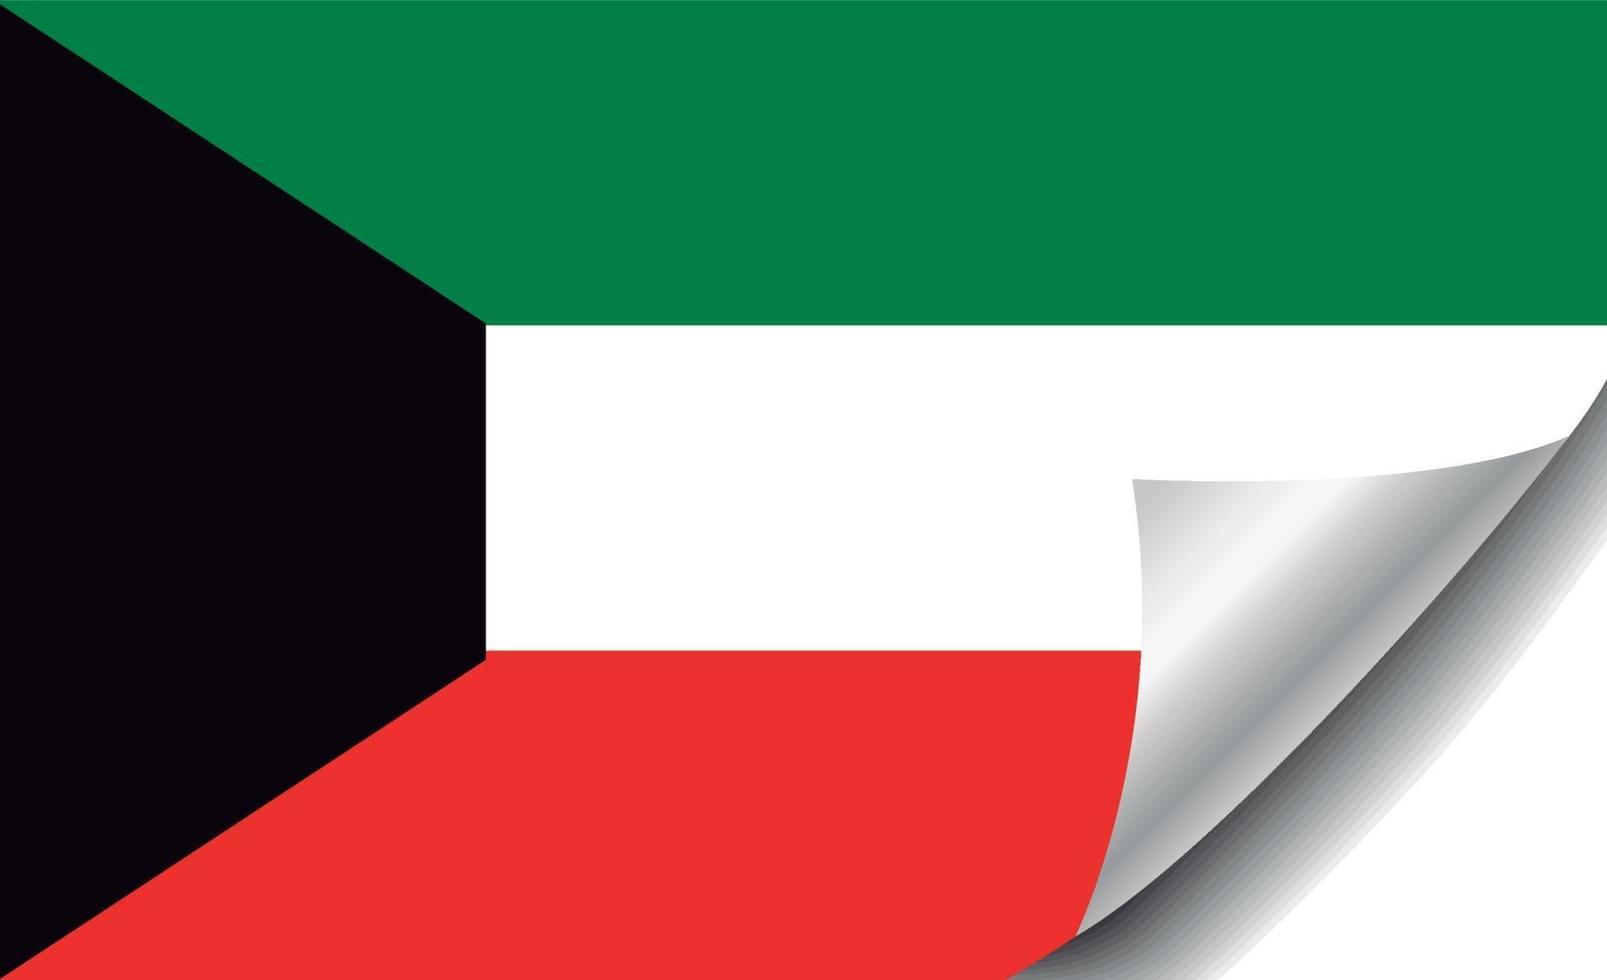 Kuwait flag with curled corner vector